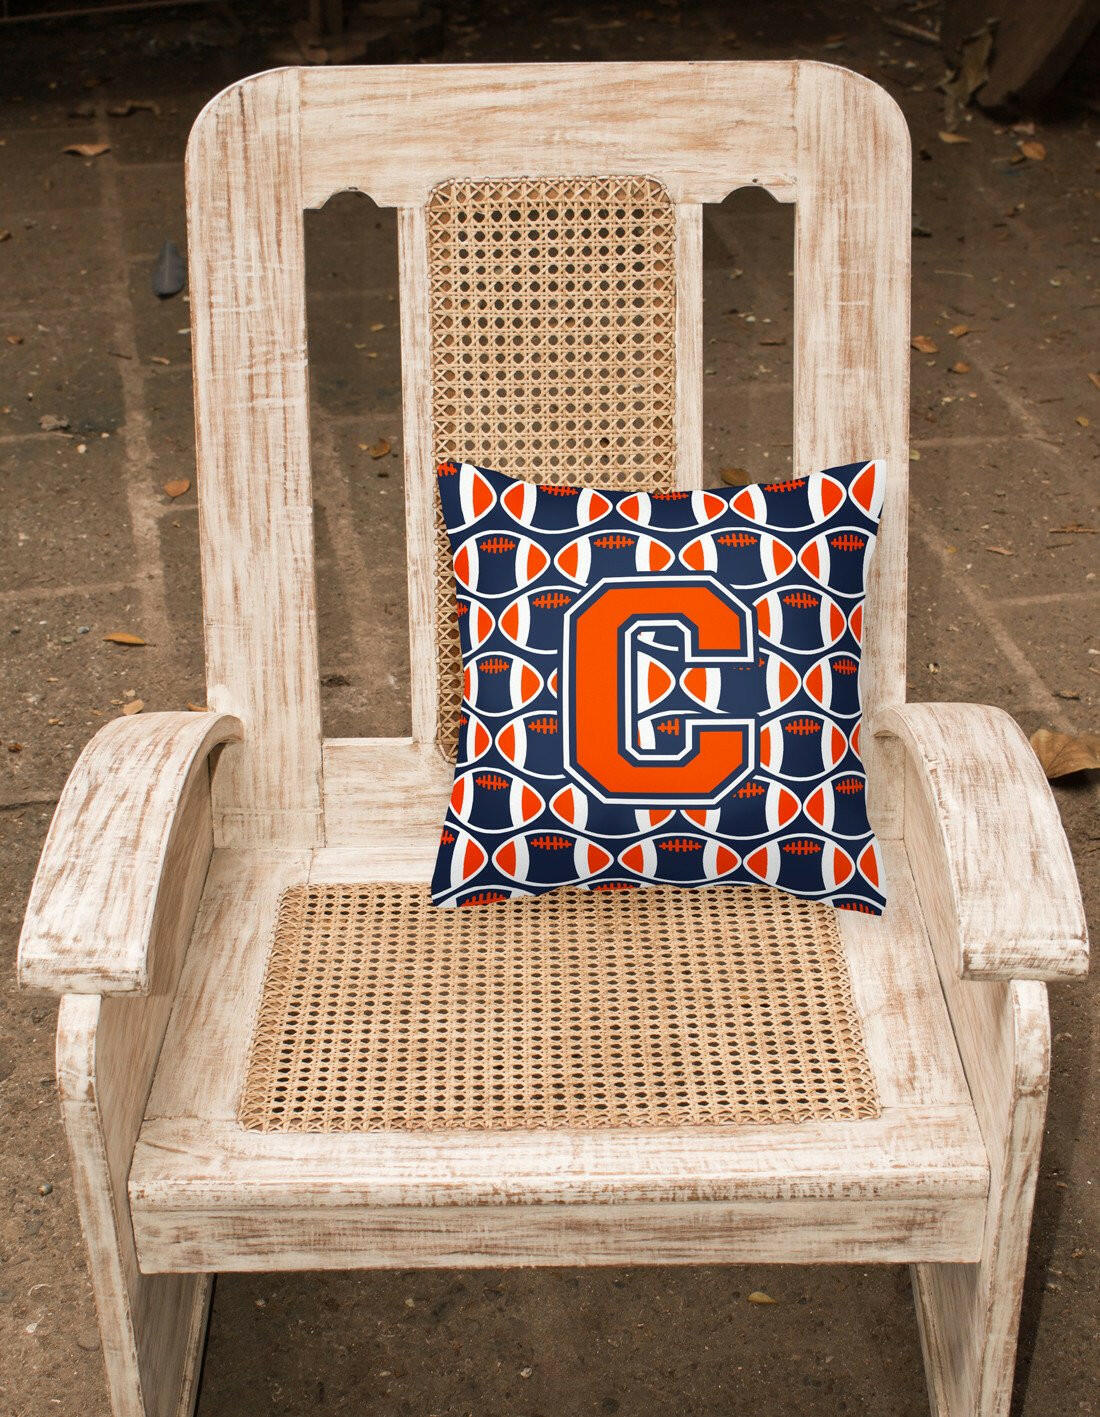 Letter C Football Orange, Blue and white Fabric Decorative Pillow CJ1066-CPW1414 by Caroline's Treasures